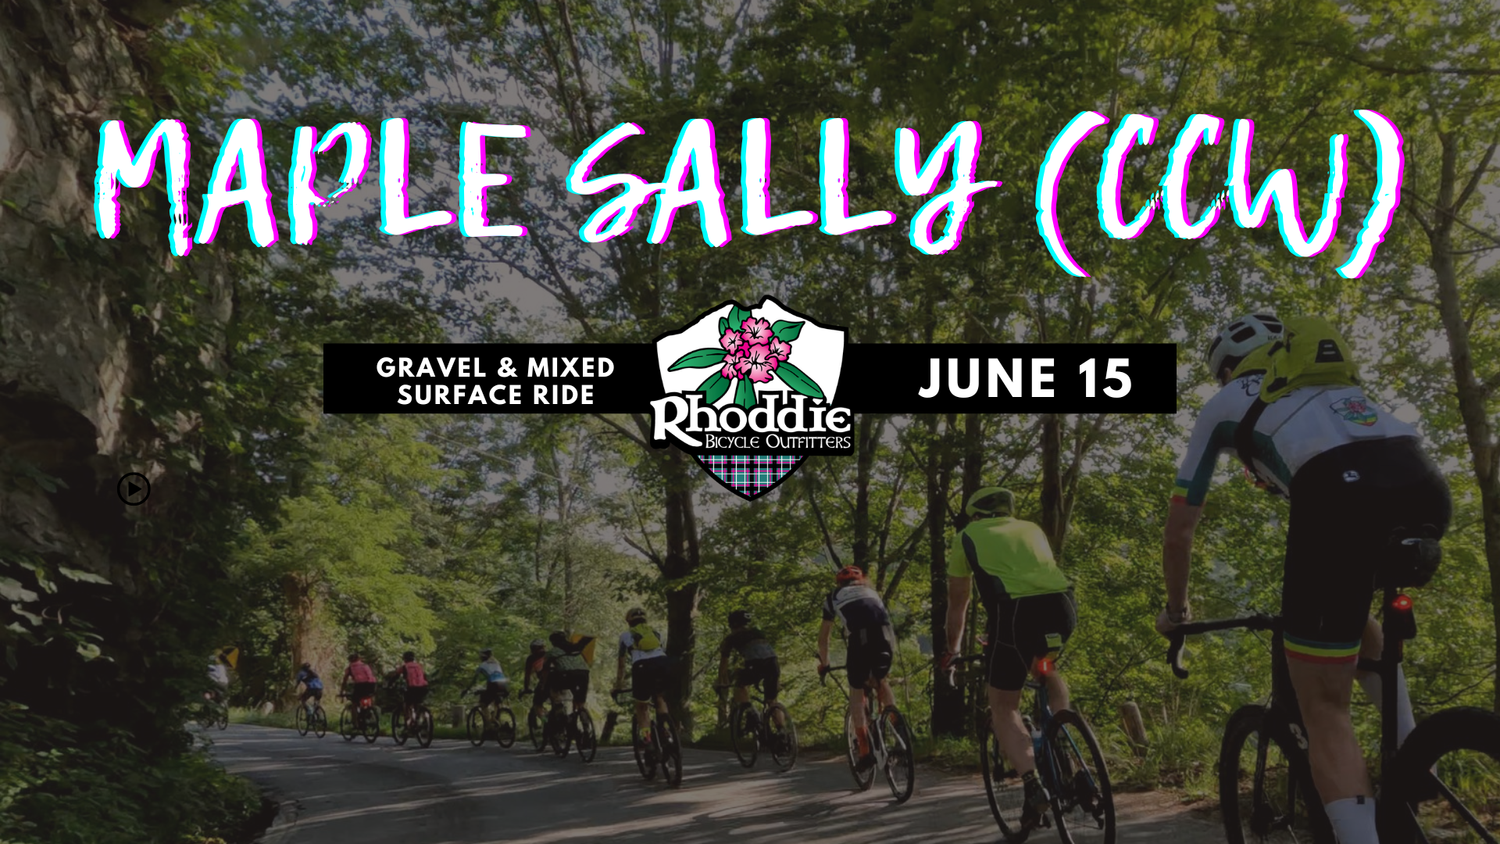 Maple Sally CCW Ride with Rhoddie Bicycle Outfitters